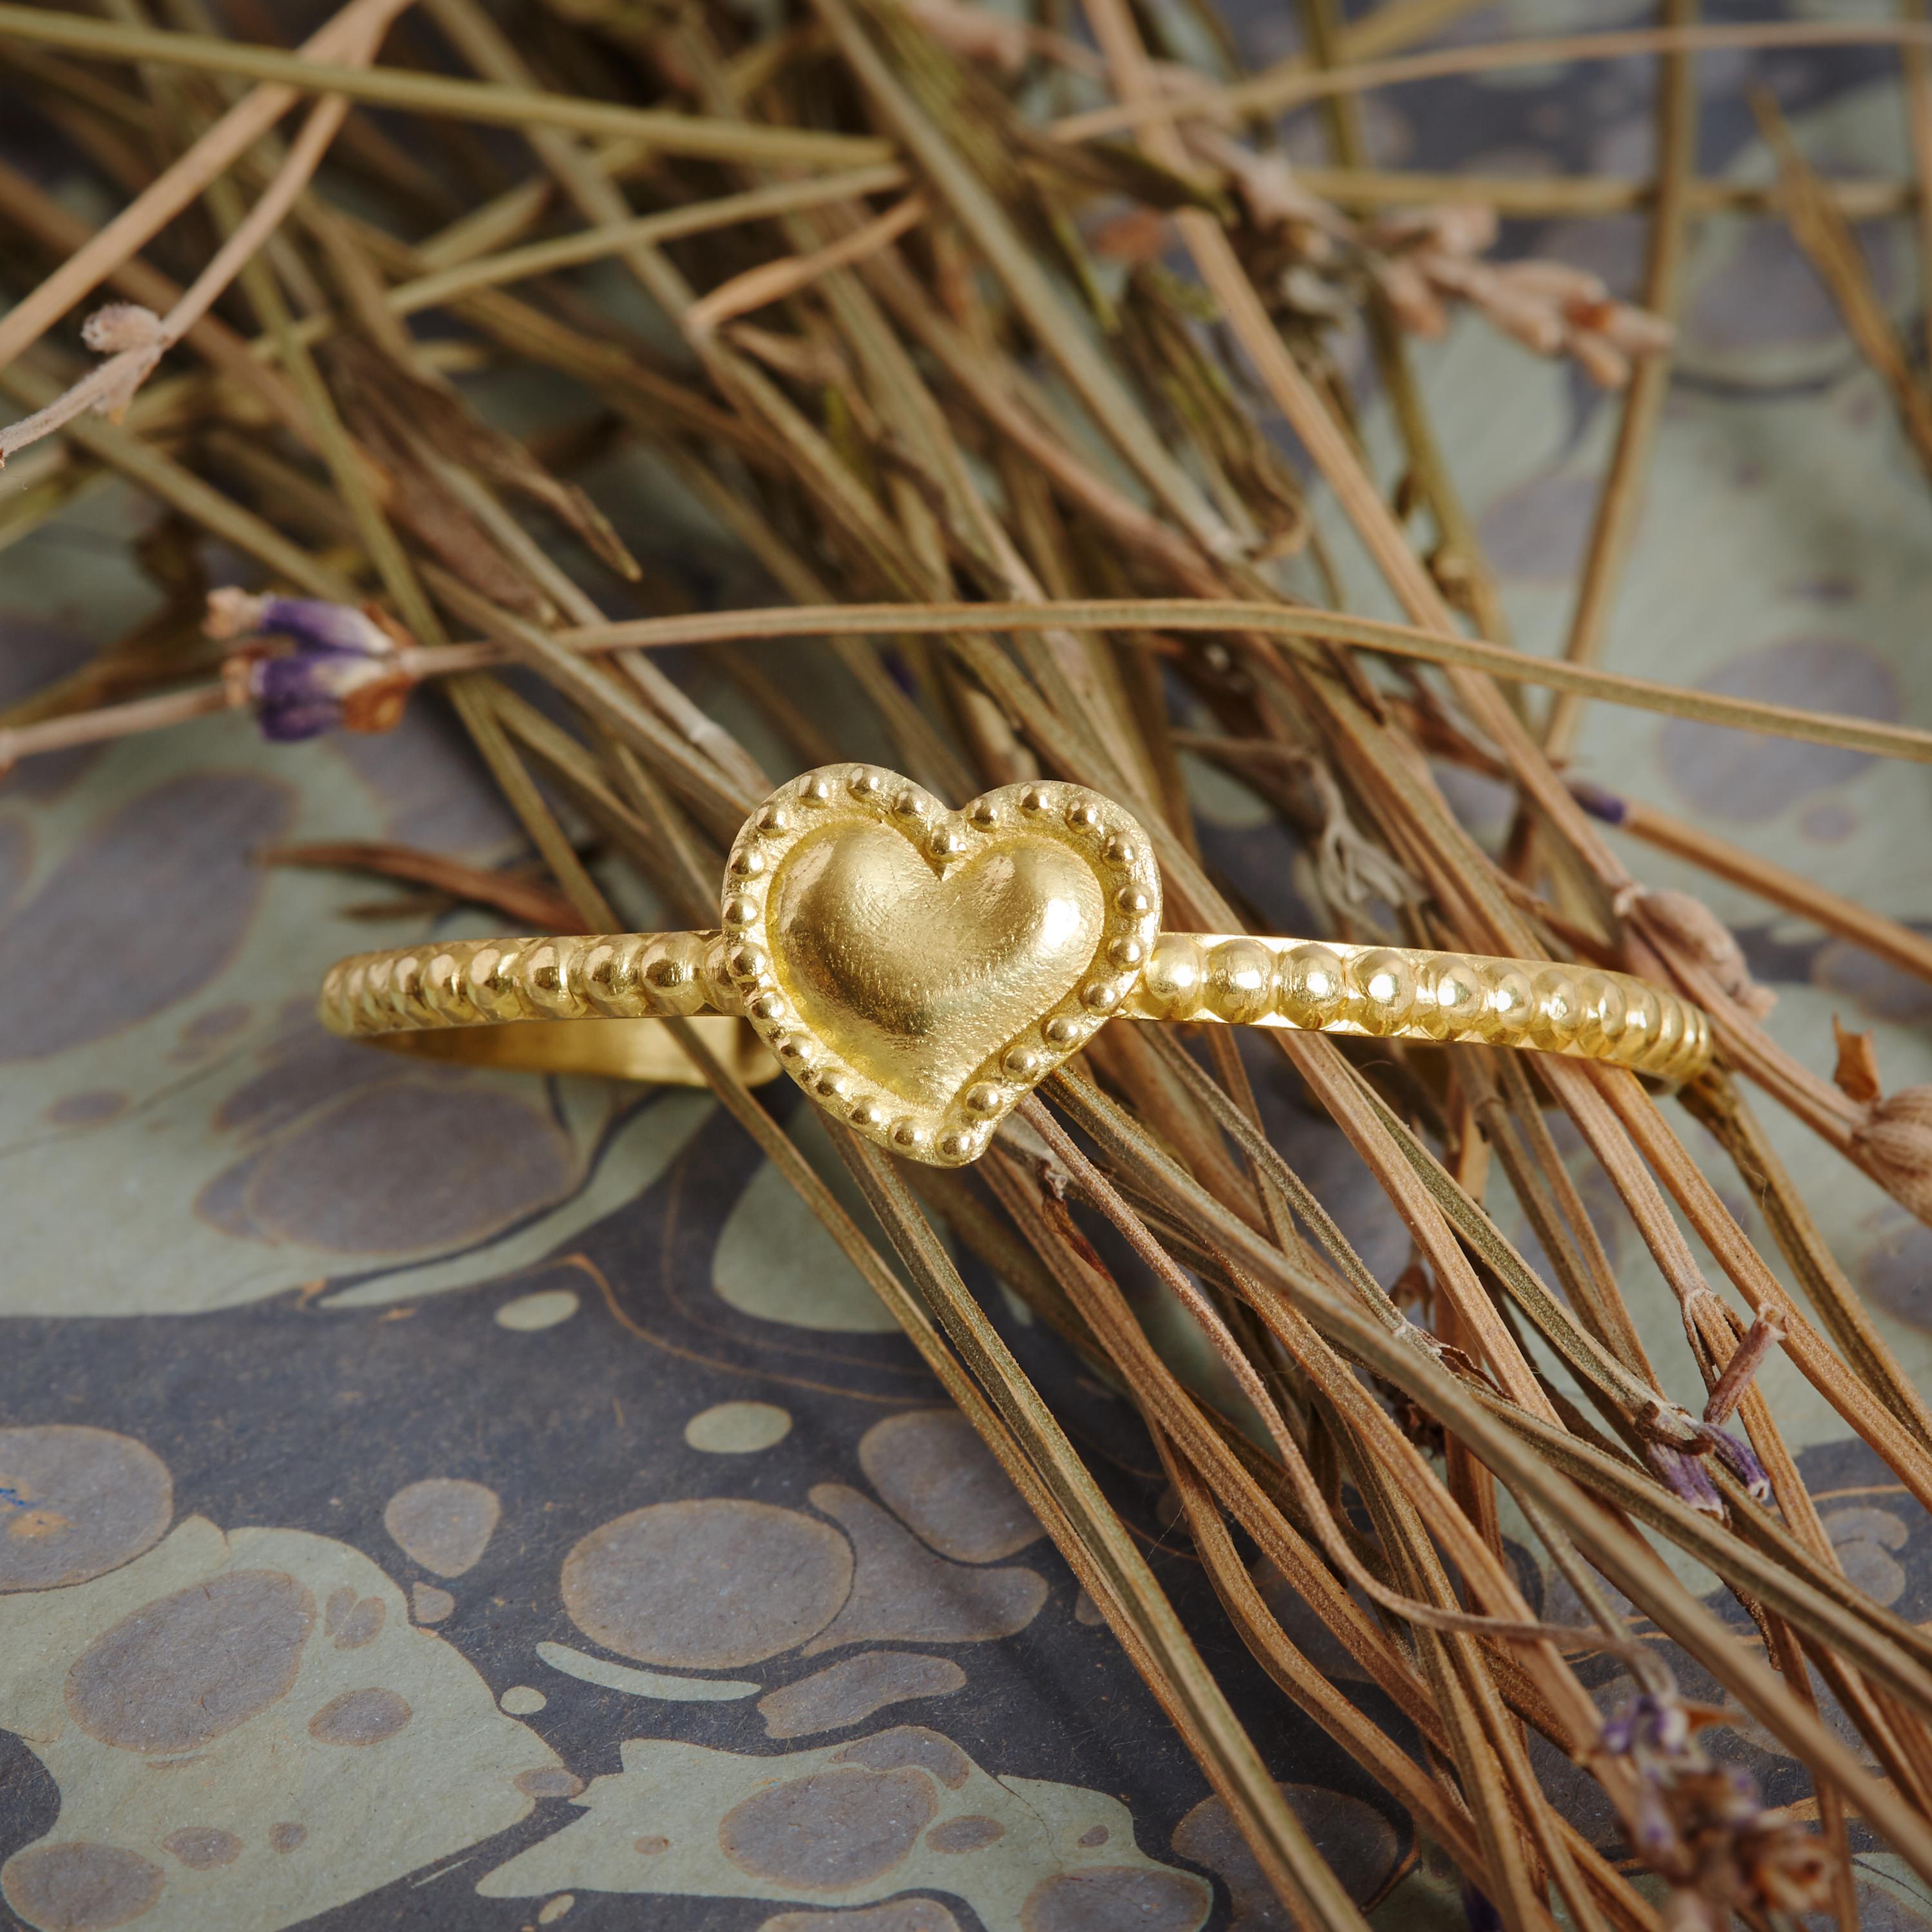 Handcrafted 18 karat gold solid sacred heart cuff

Symbolism:
The sacred heart symbolises eternal, undying love and devotion

Materials:
18 karat gold

If this item appears to be out of stock, we can order another piece for you. Please note that the